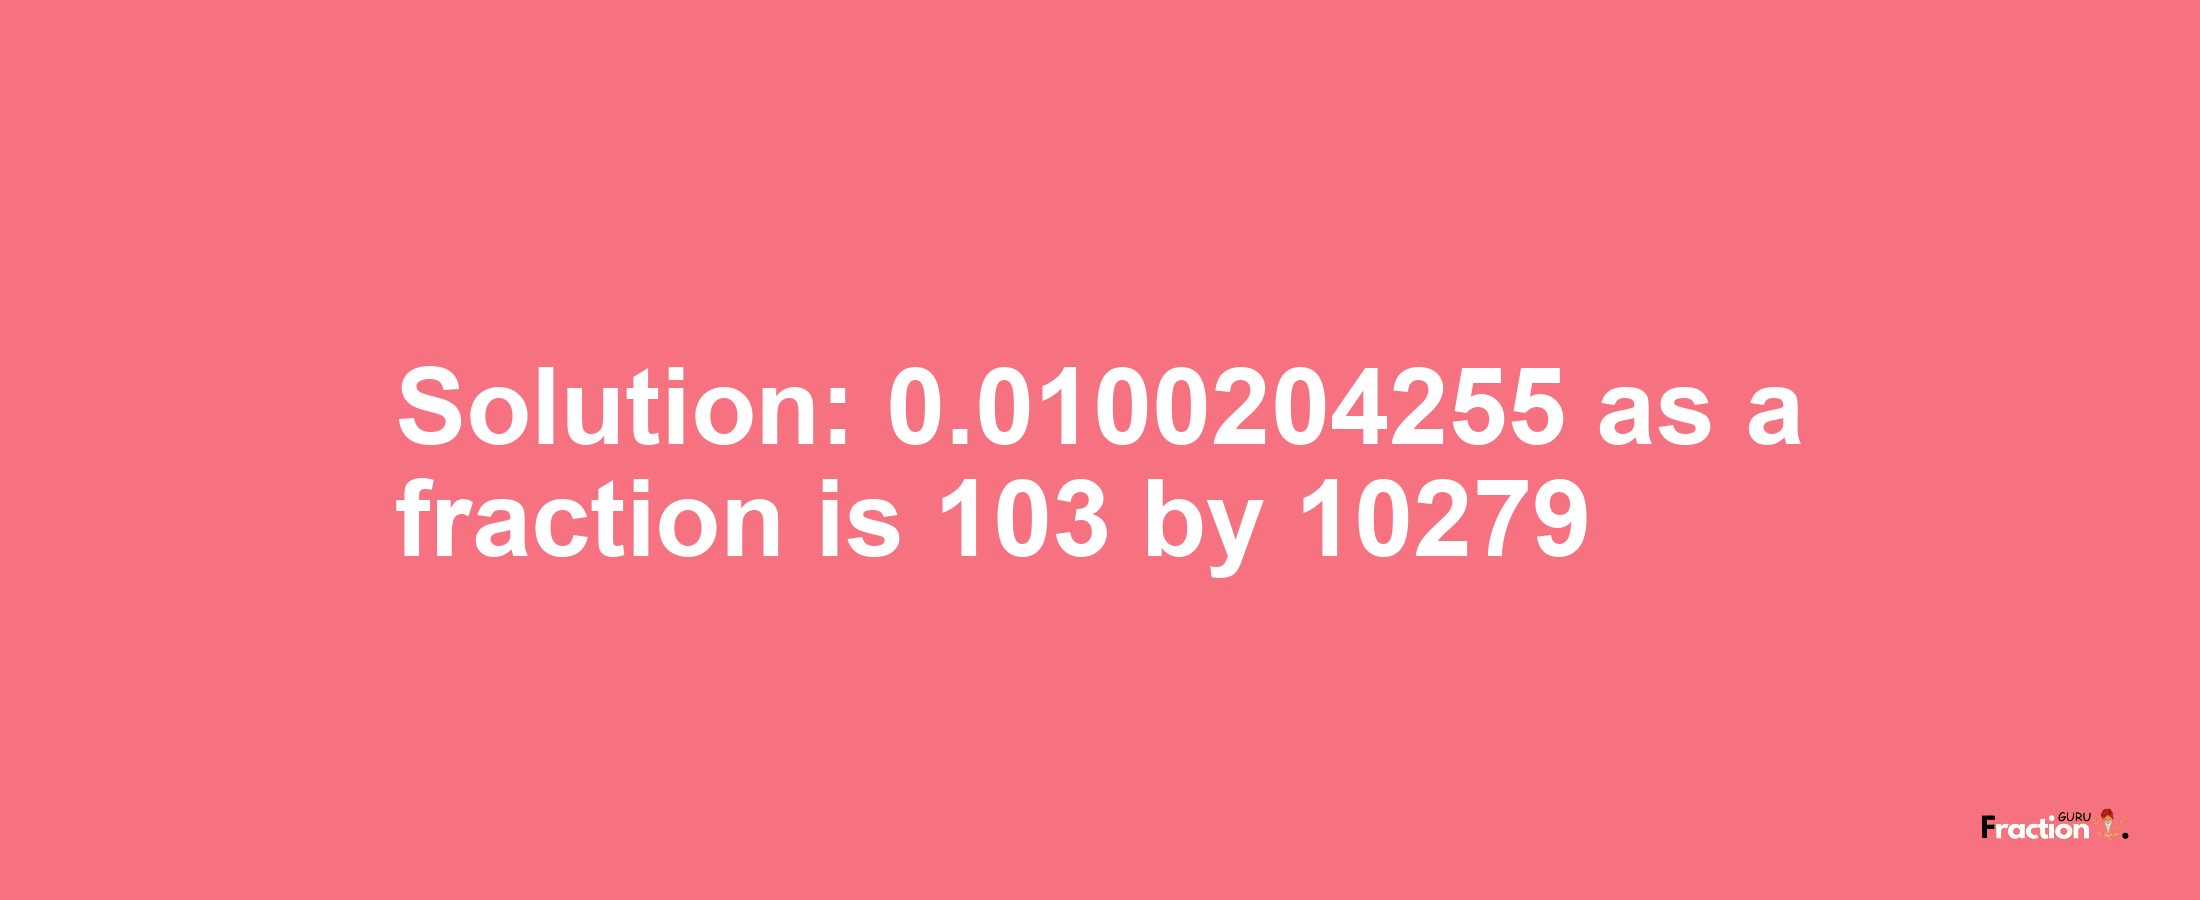 Solution:0.0100204255 as a fraction is 103/10279